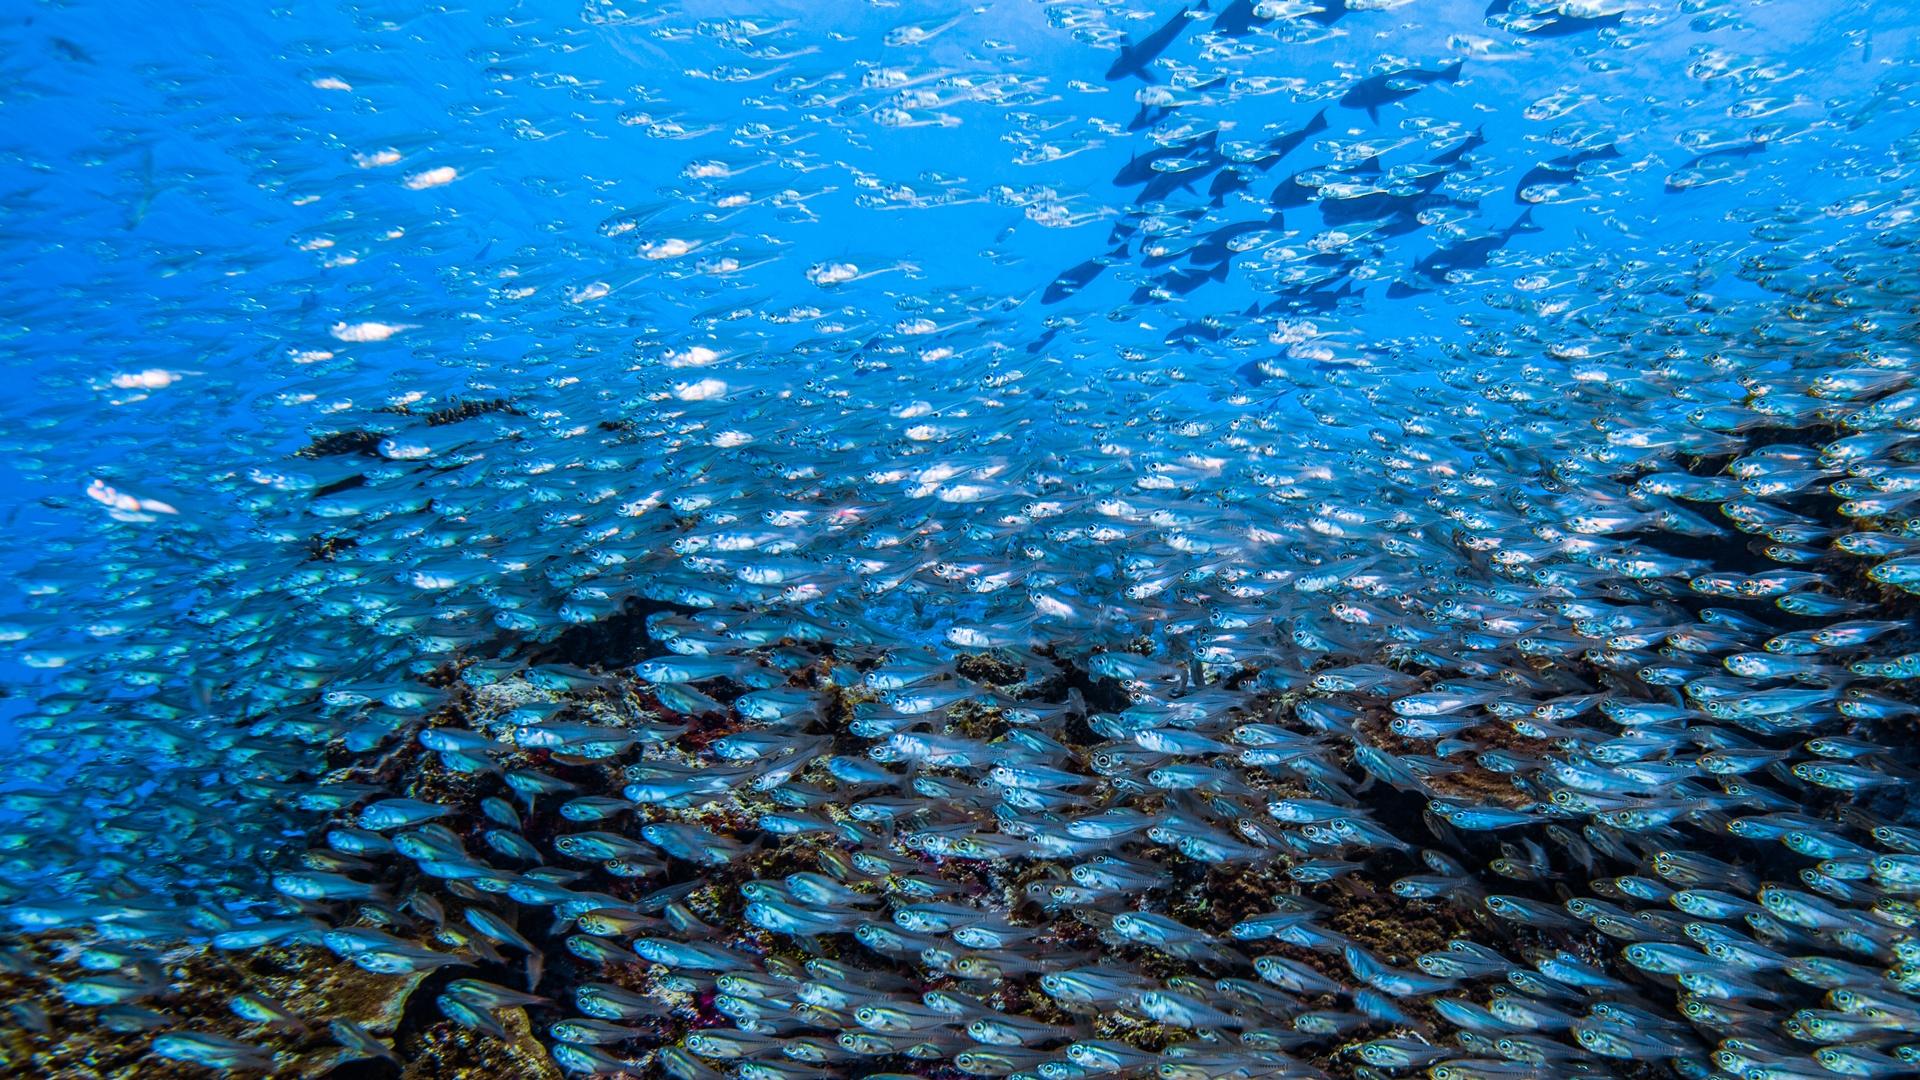 A school of glassfish in the Great Barrier Reef.